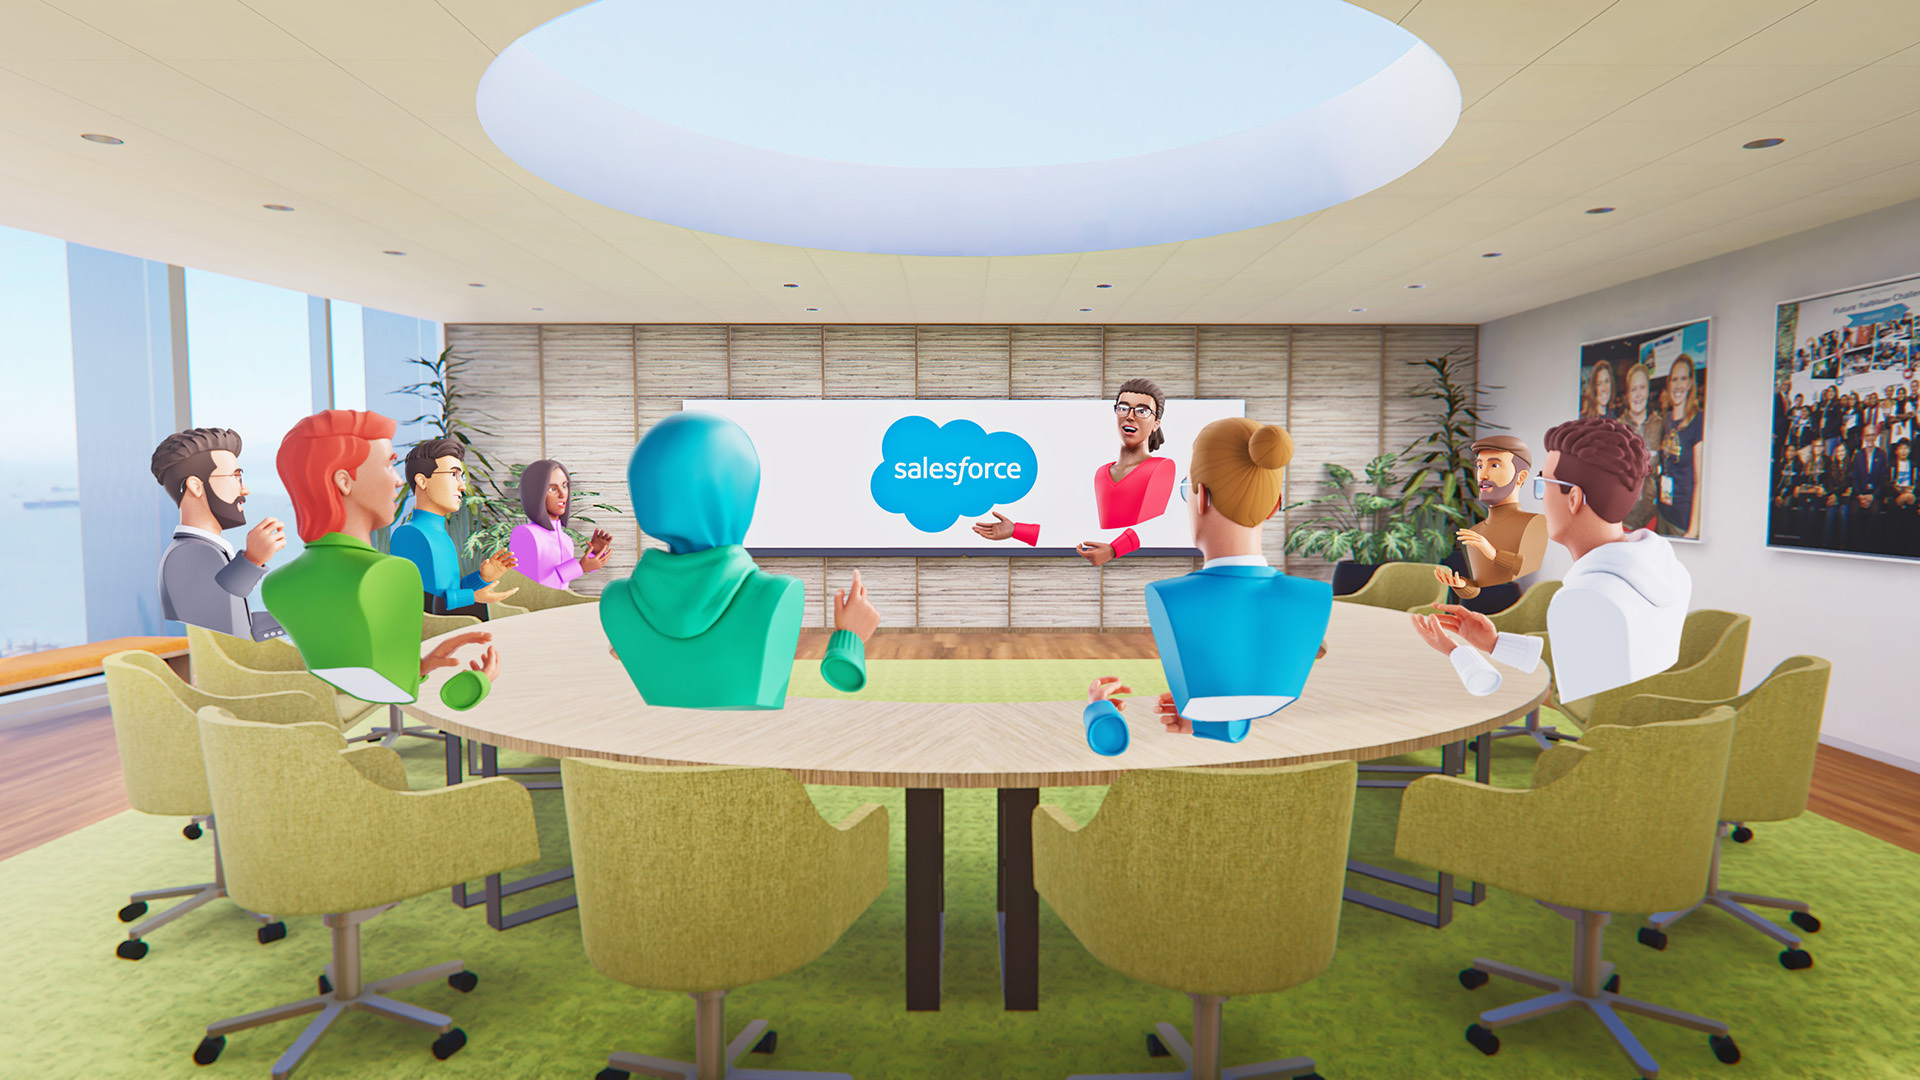 custom virtual reality office and people on a virtual reality meeting work together in a virtual space